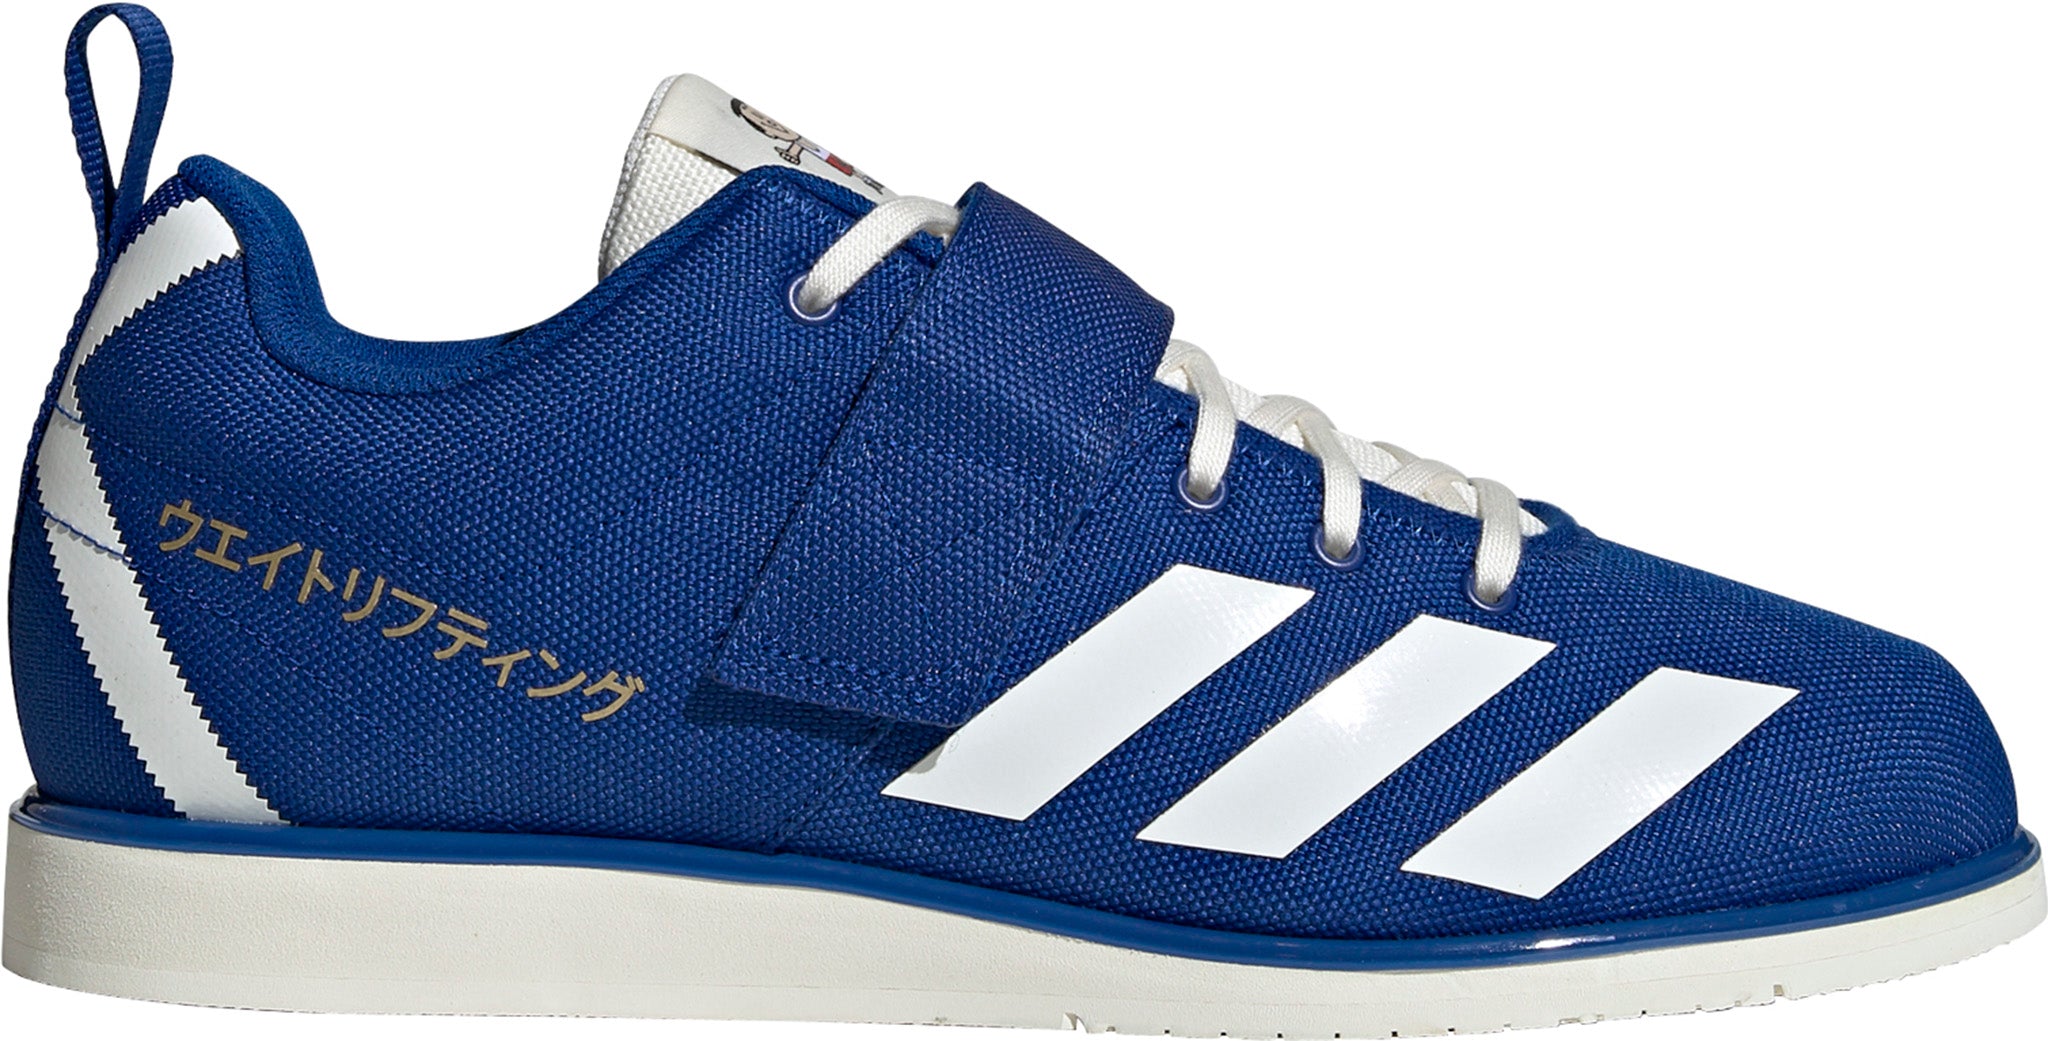 Adidas Germany Olympics Weightlifting Powerlift 4 Shoes - Men's | Altitude